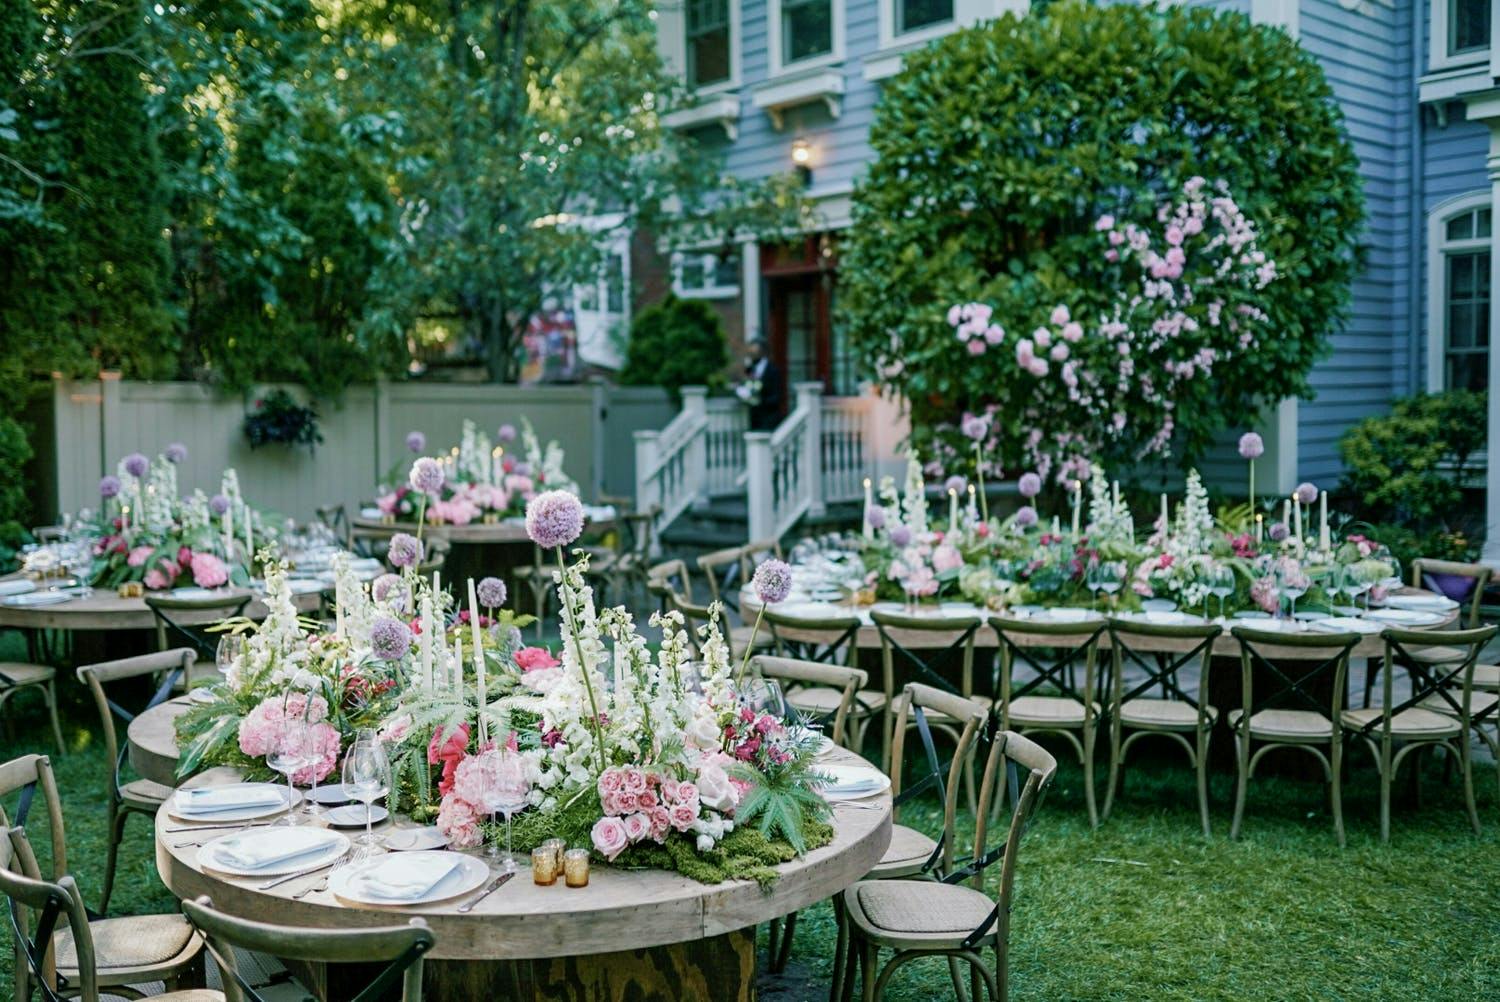 Backyard wedding with tablescapes of lavish greenery, white spiky florals, and purple allium | PartySlate